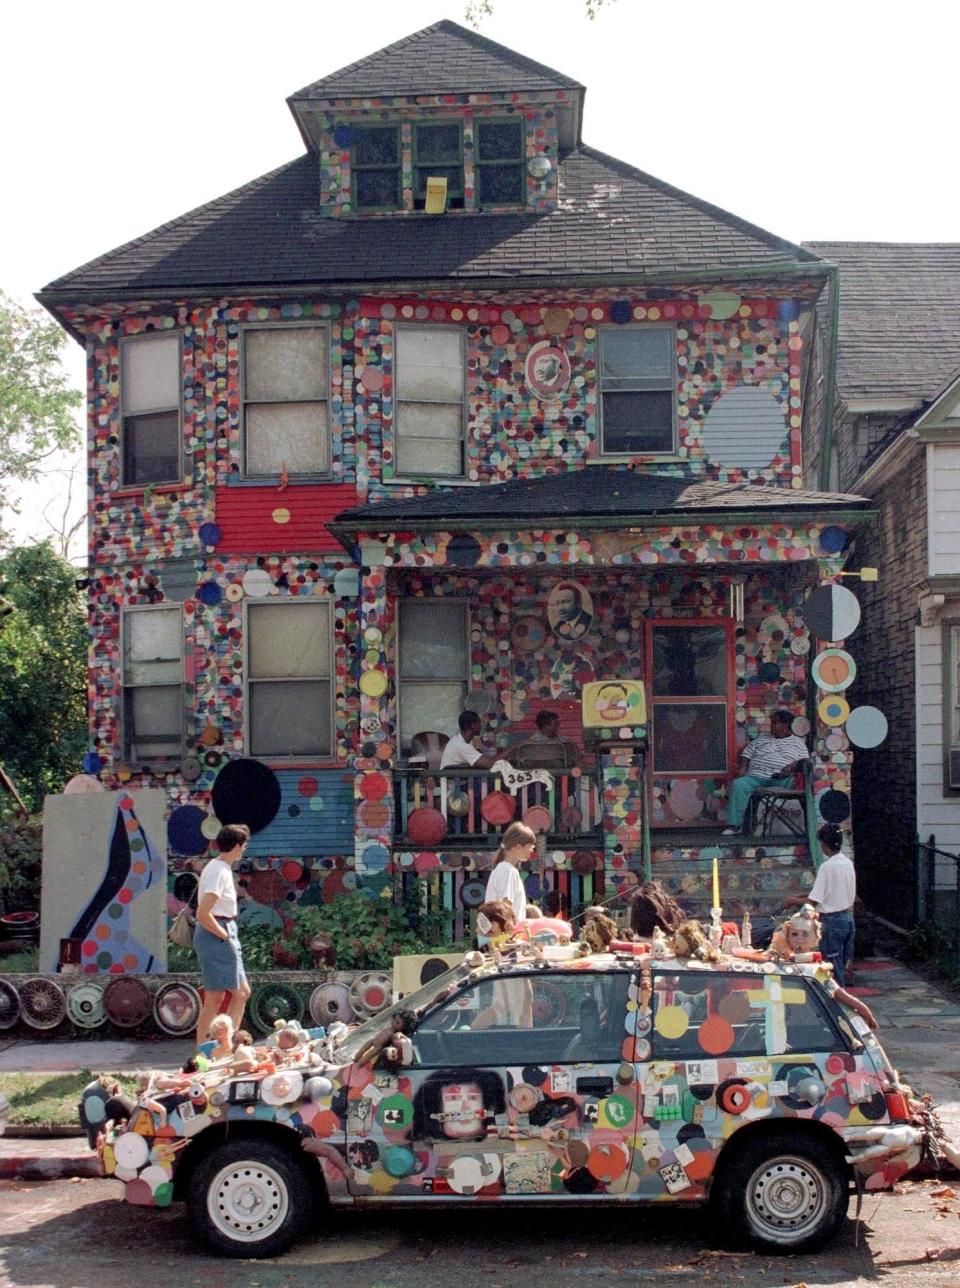 The Dotty Wotty House  Artist Tyree Guyton creates folk art by covering part of a neighborhood with polka dots in what he calls "art for the people and medicine for the soul."   JEFF KOWALSKY/AFP/Getty Images